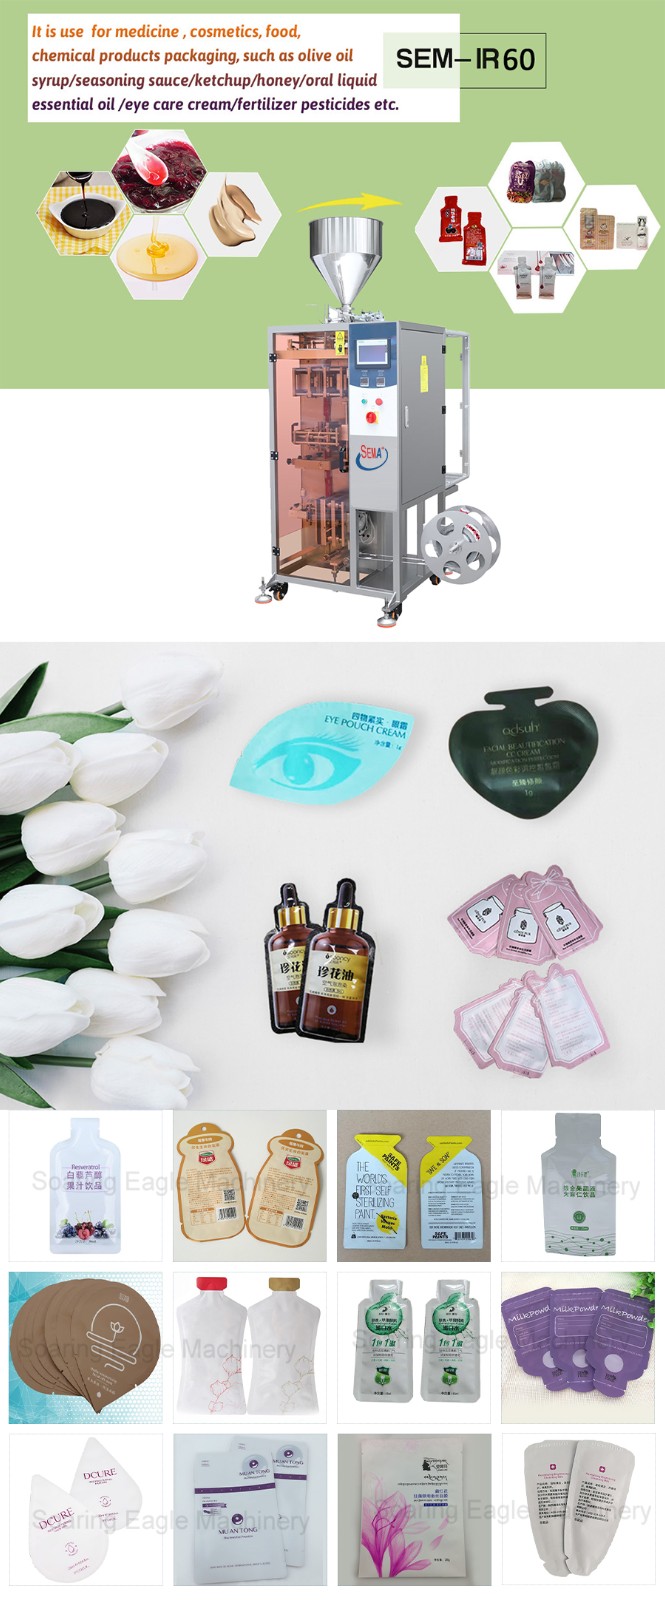 Automatic multifunctional special-shaped bag sachet filling, packaging and sealing machine